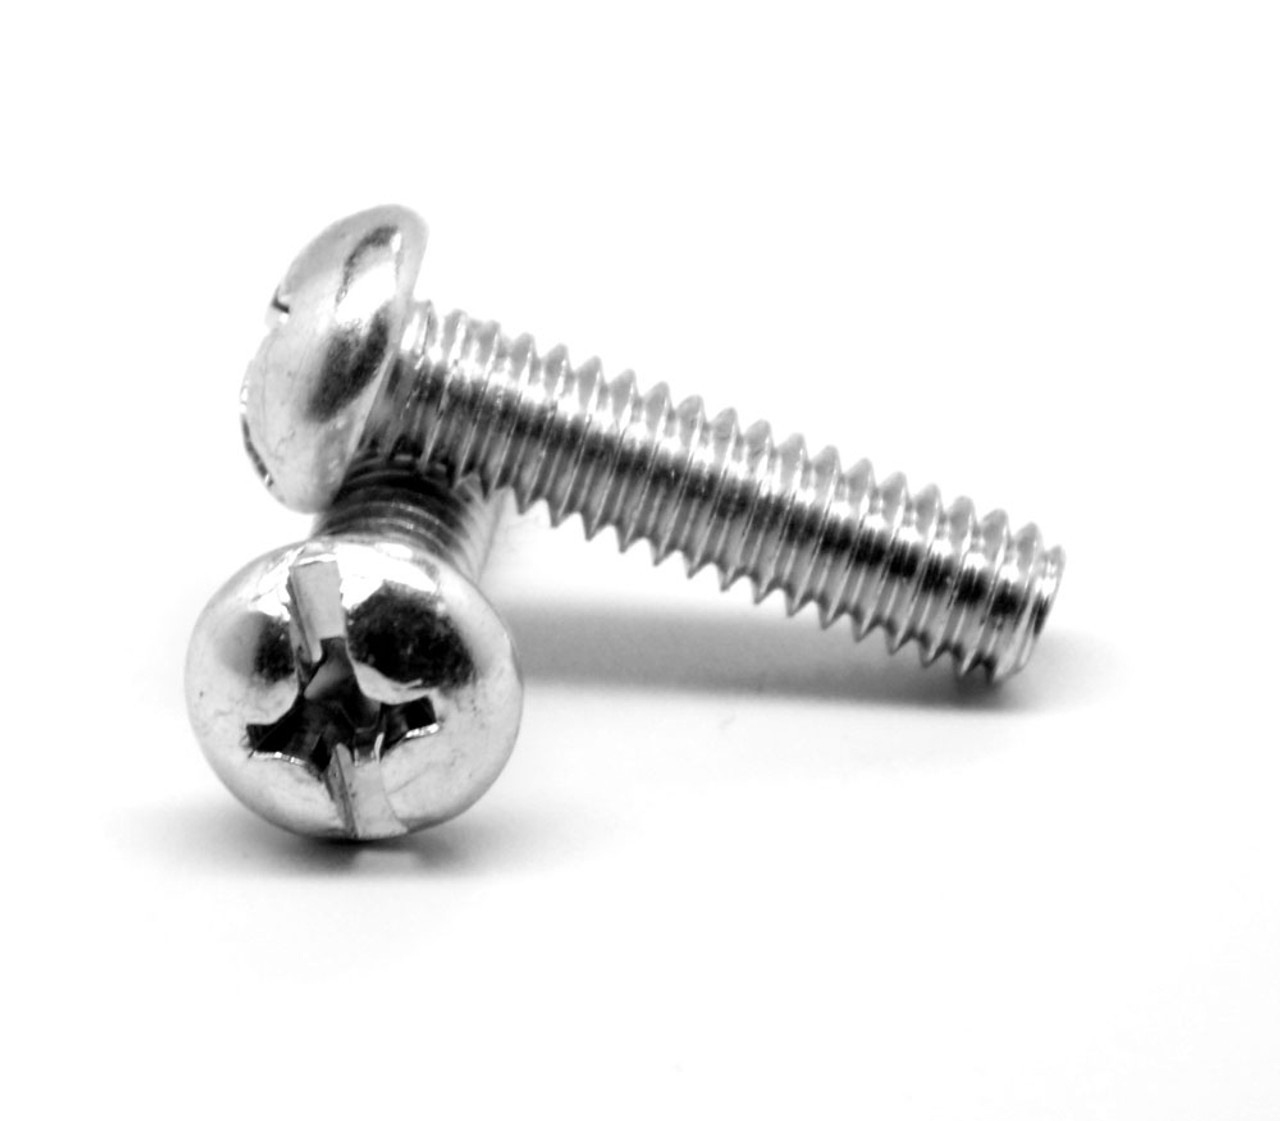 #4-40 x 1/2" (FT) Coarse Thread Machine Screw Combo (Phillips/Slotted) Pan Head Low Carbon Steel Zinc Plated